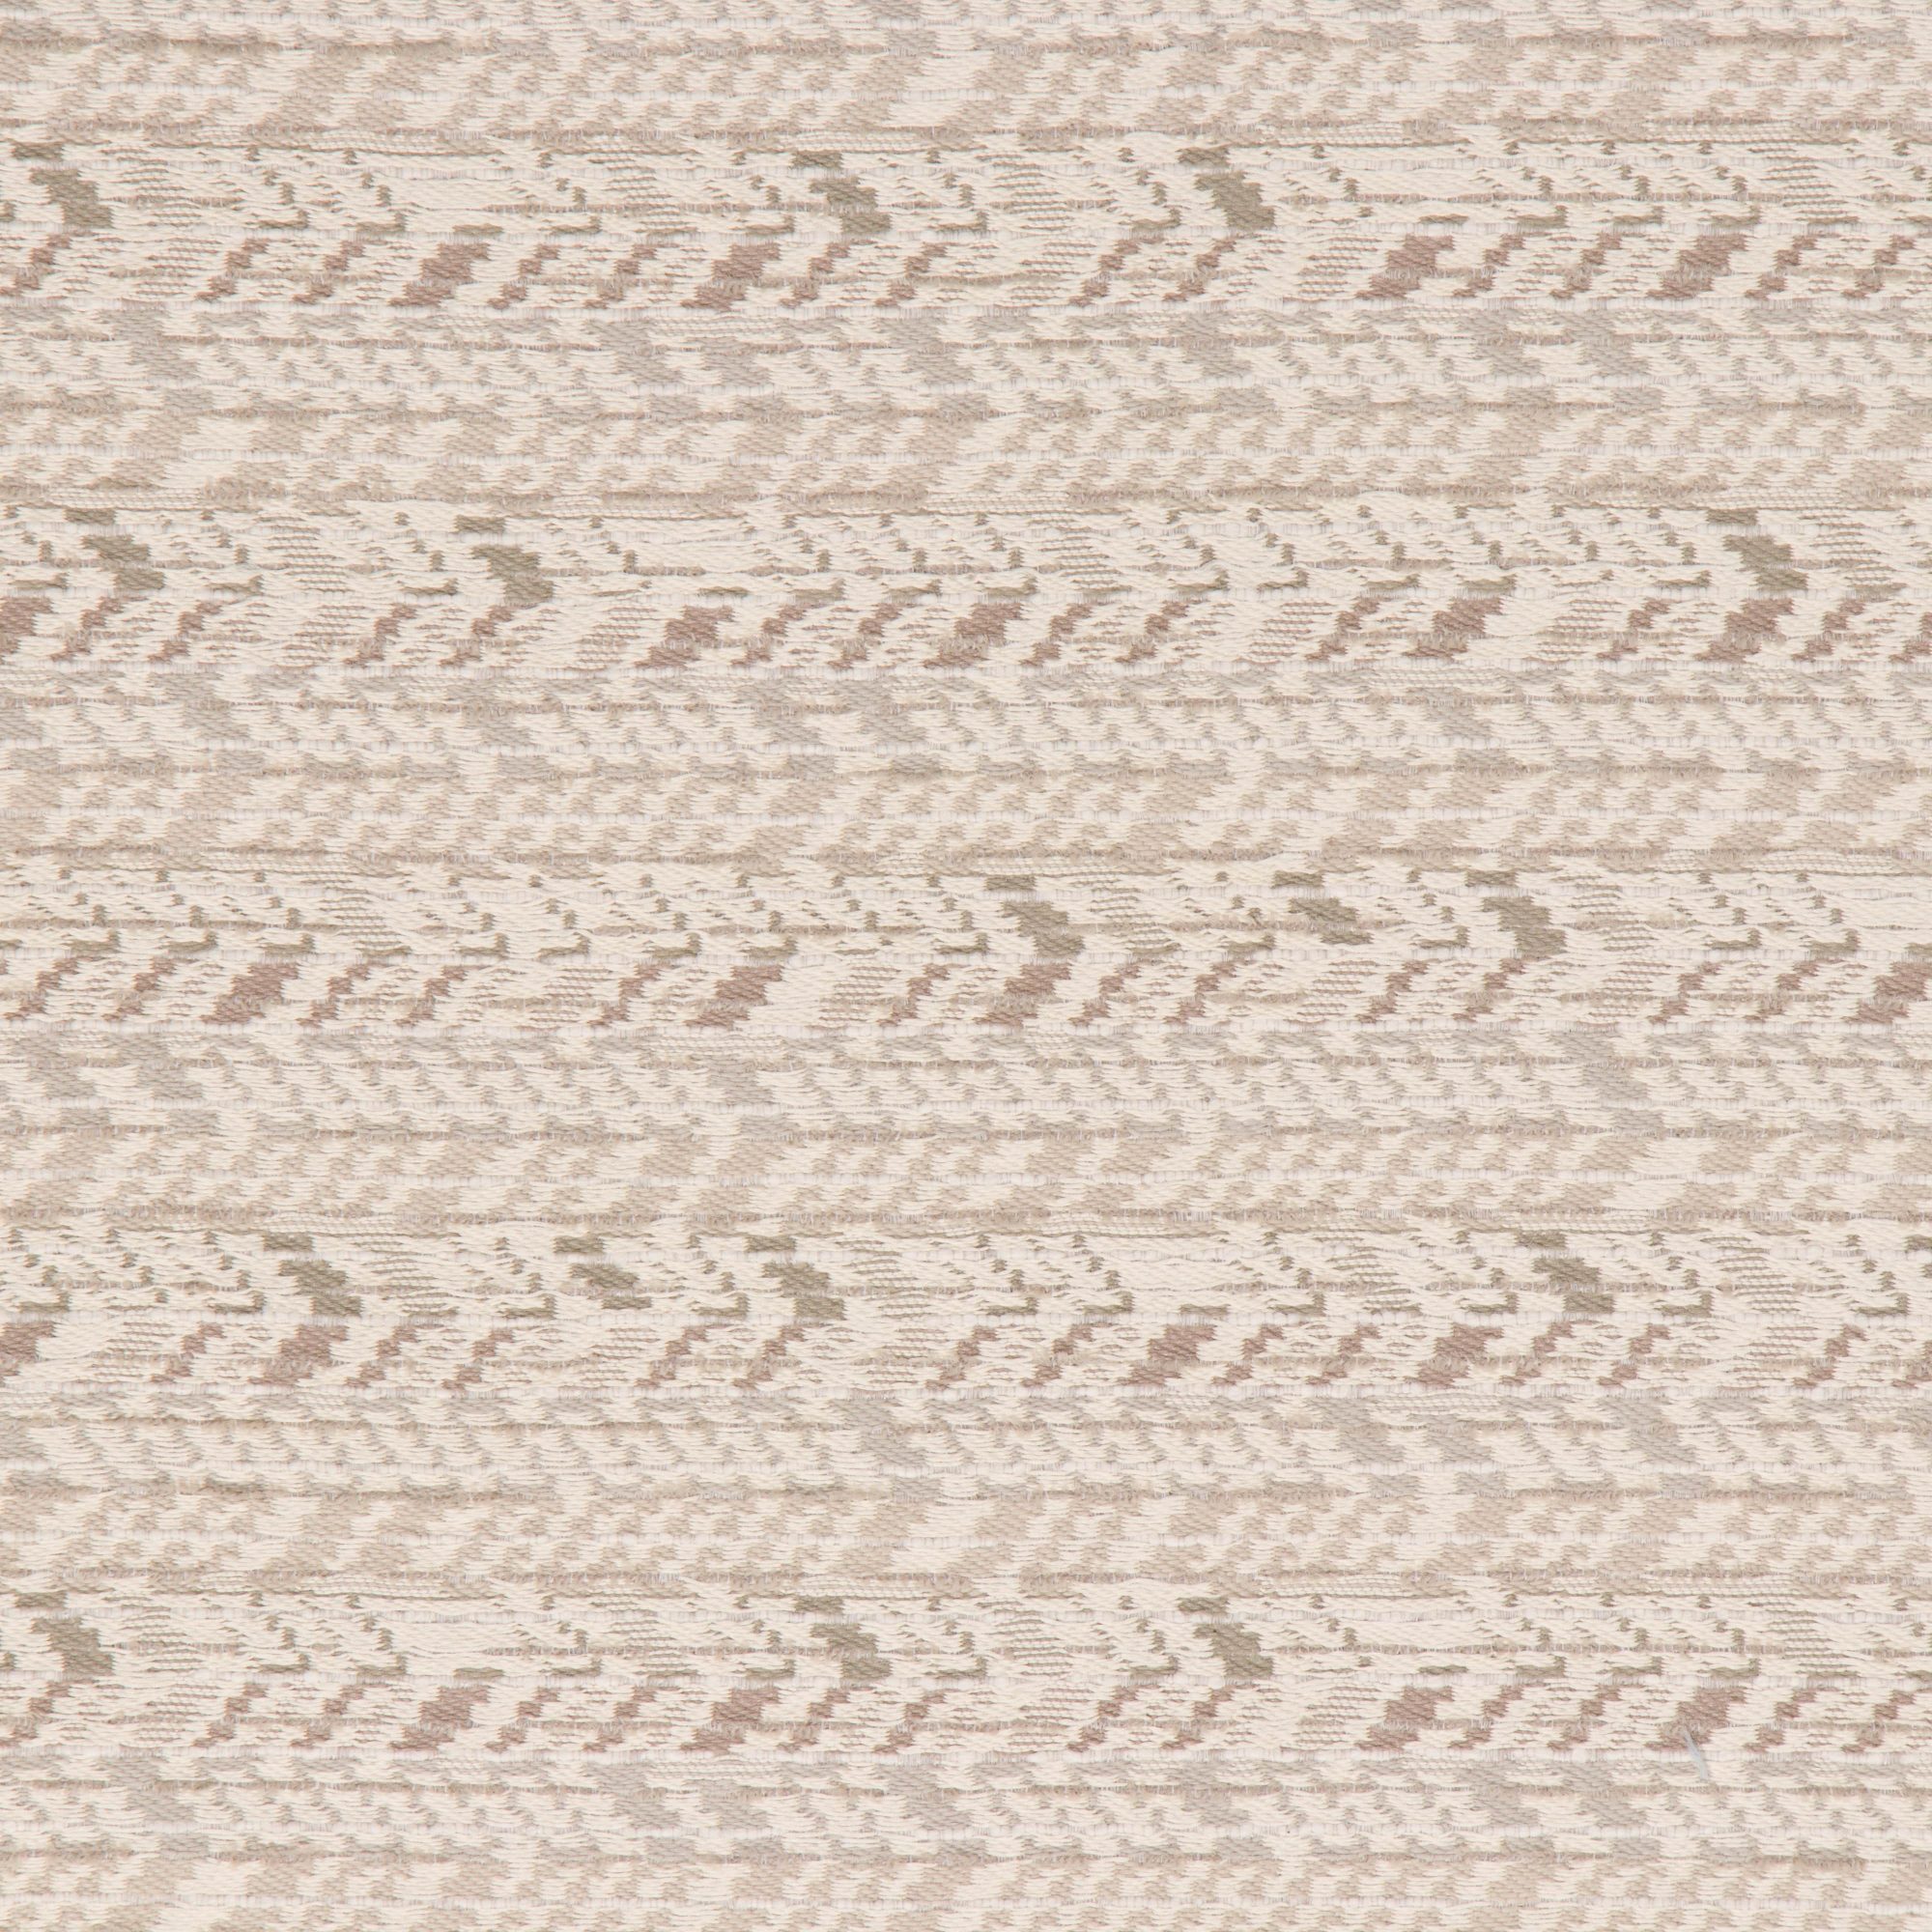 Bella Dura and Bella Dura Home fabric in the pattern Arizona and the color Pebbles.